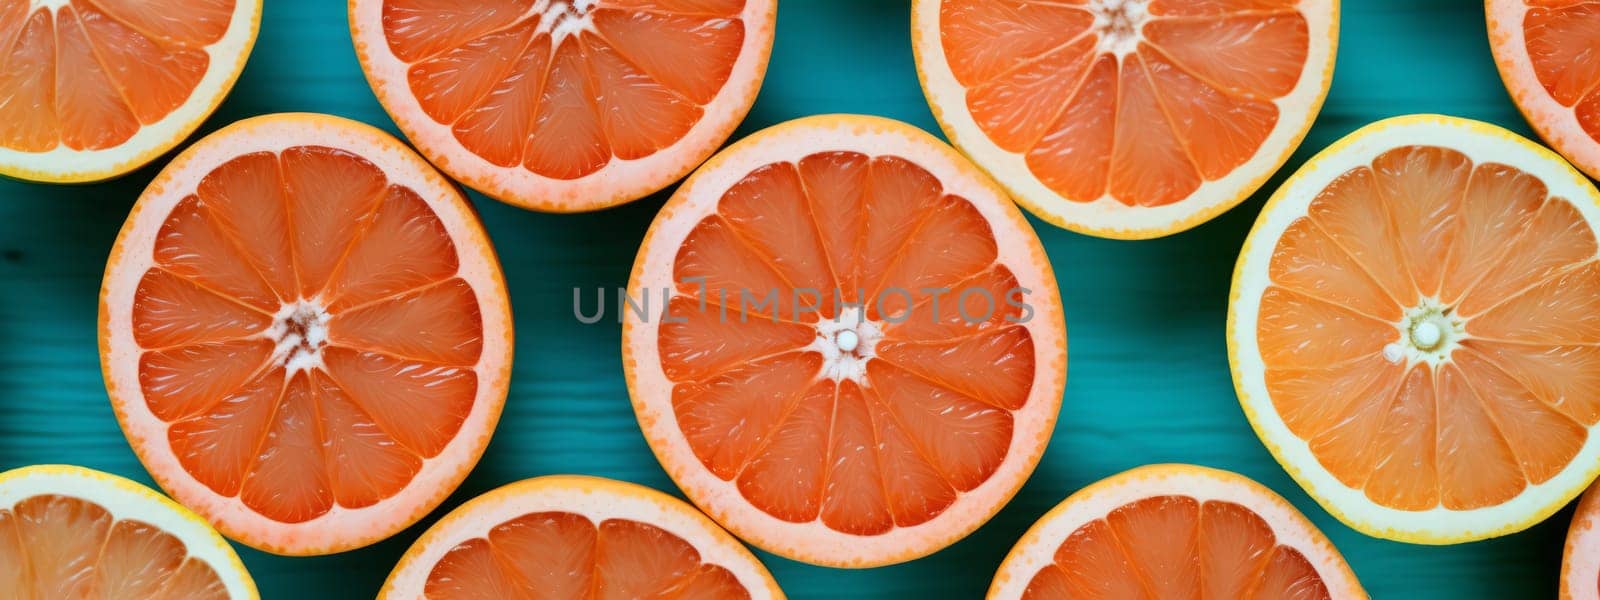 Close-up Grapefruit slices abstract texture background. by Artsiom